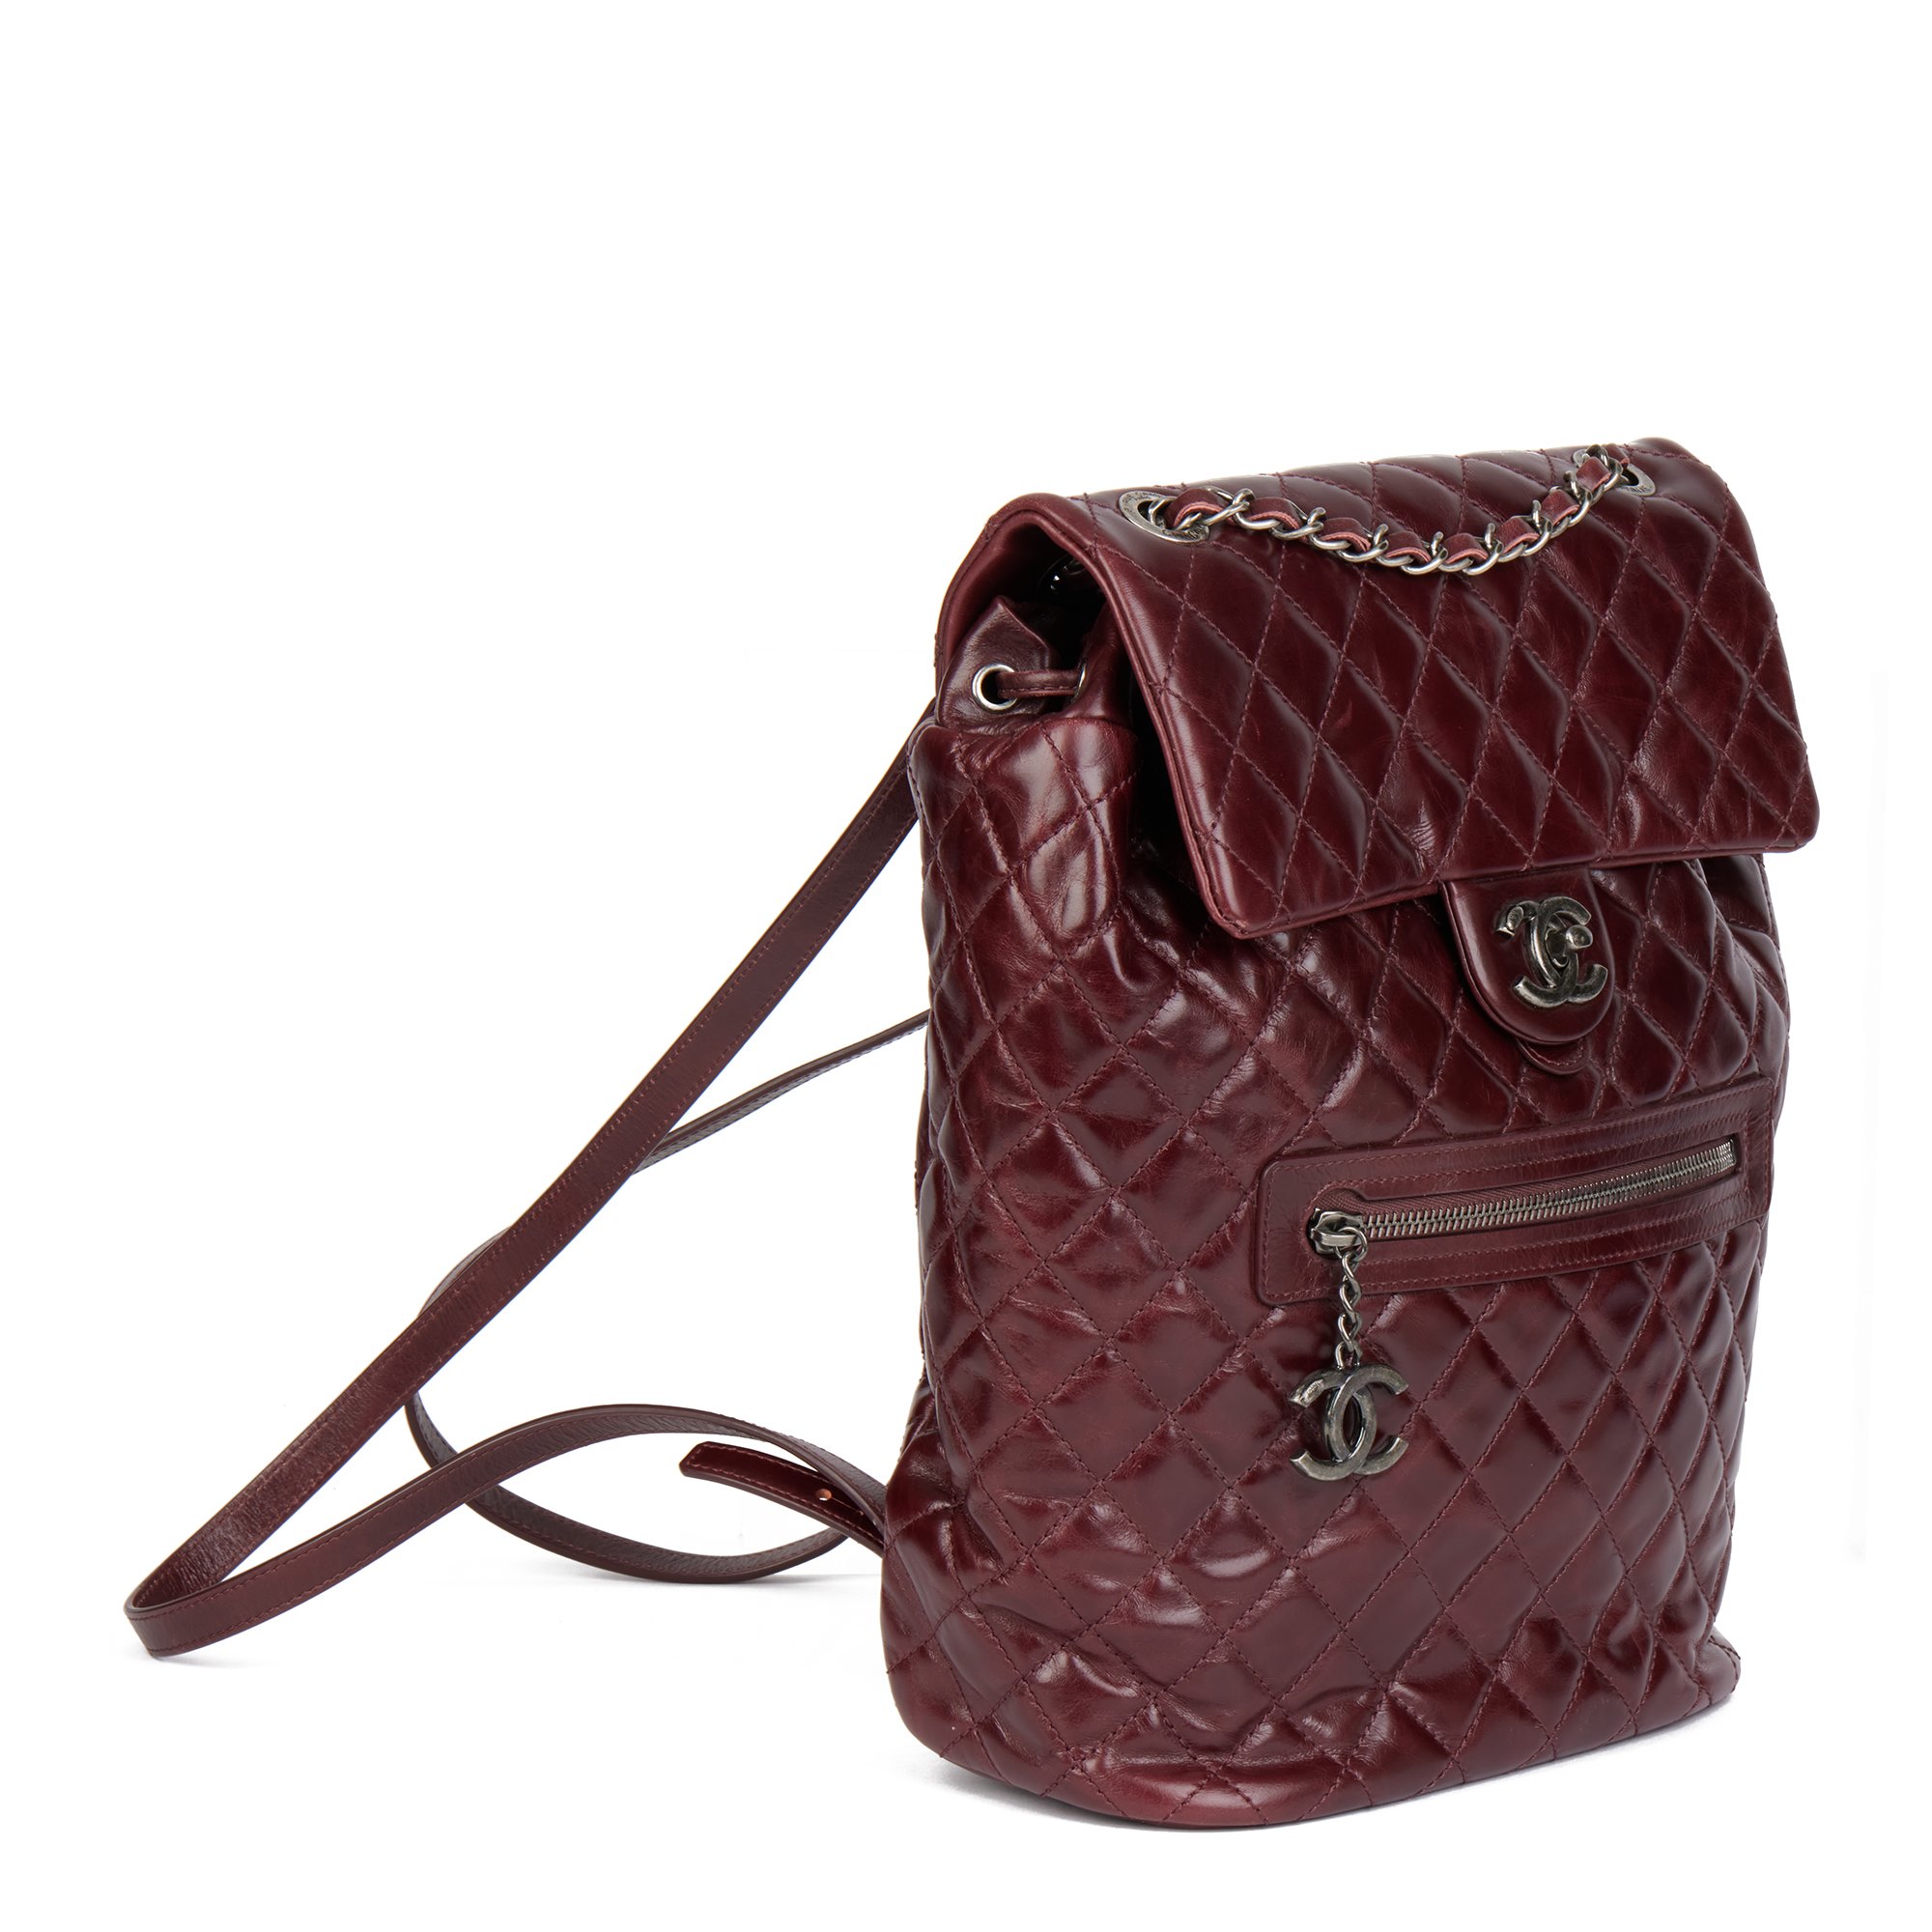 Chanel Burgundy Calfskin Leather Small Mountain Backpack